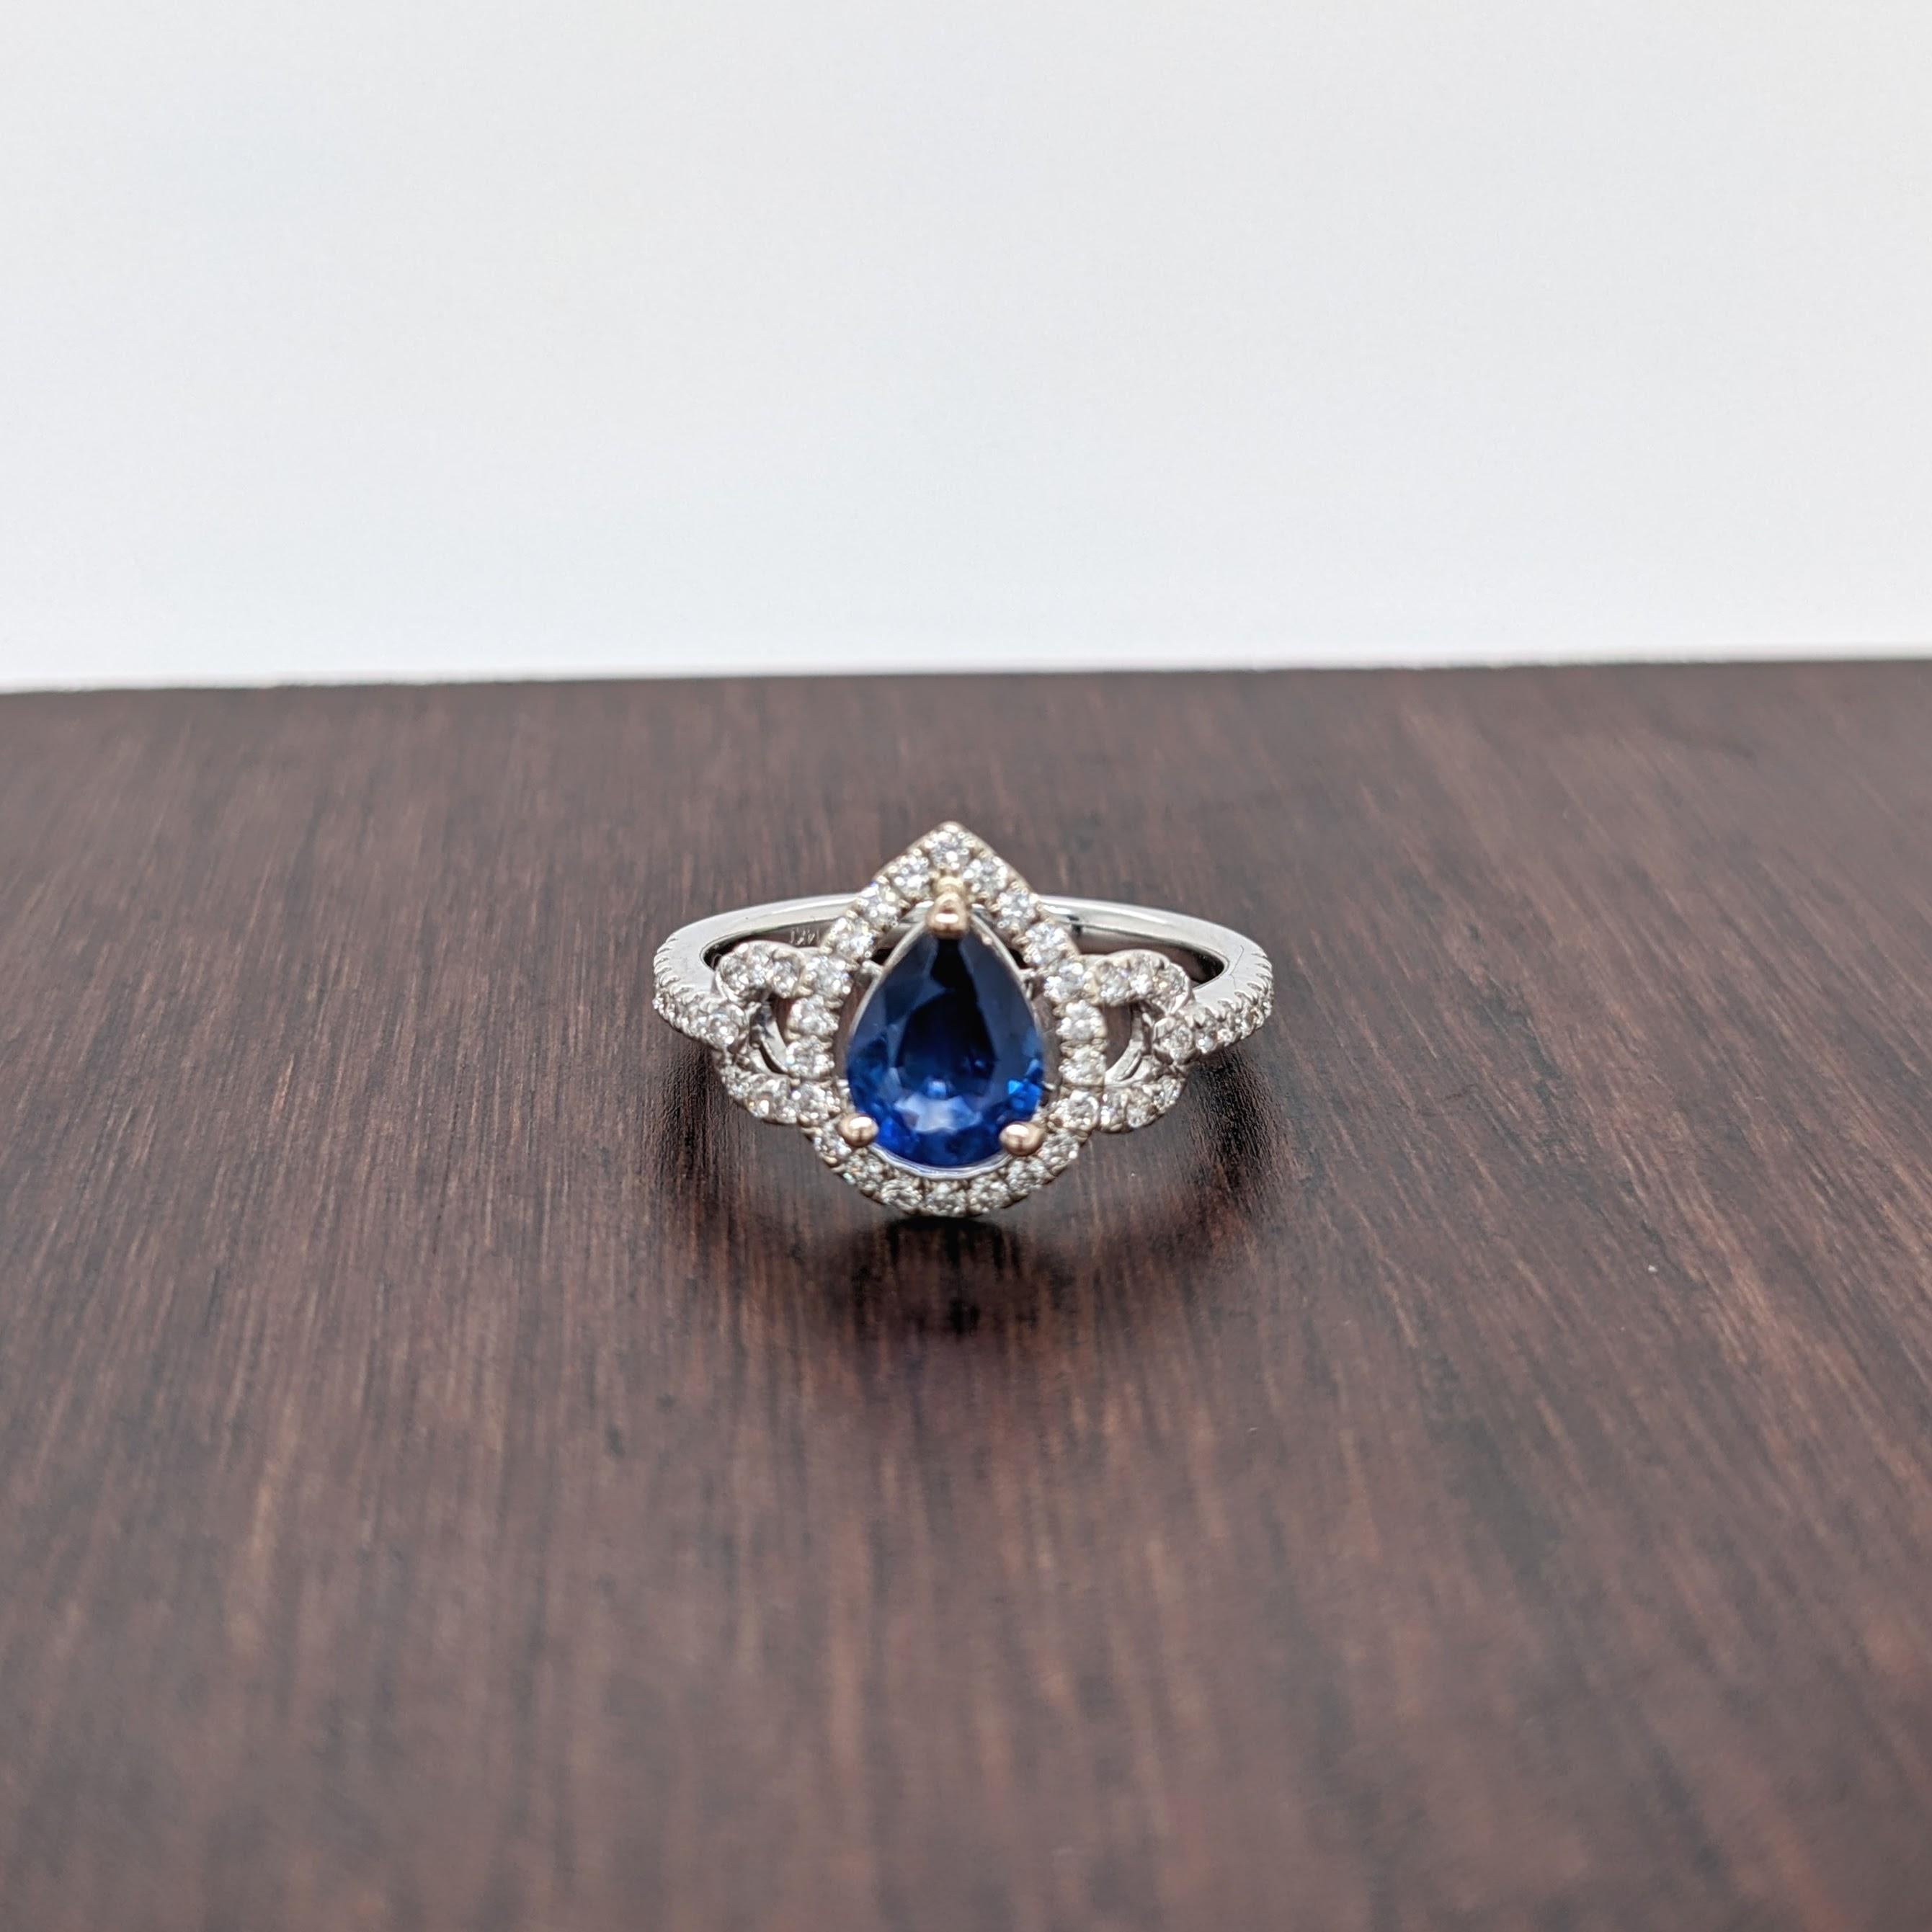 Stunning is an understatement for this ring! The all natural diamond halo and accents perfectly emphasize the vivid blue in this sapphire from Ceylon. The halo design gives a slightly vintage feel but in the most elegant way. This ring is now ready